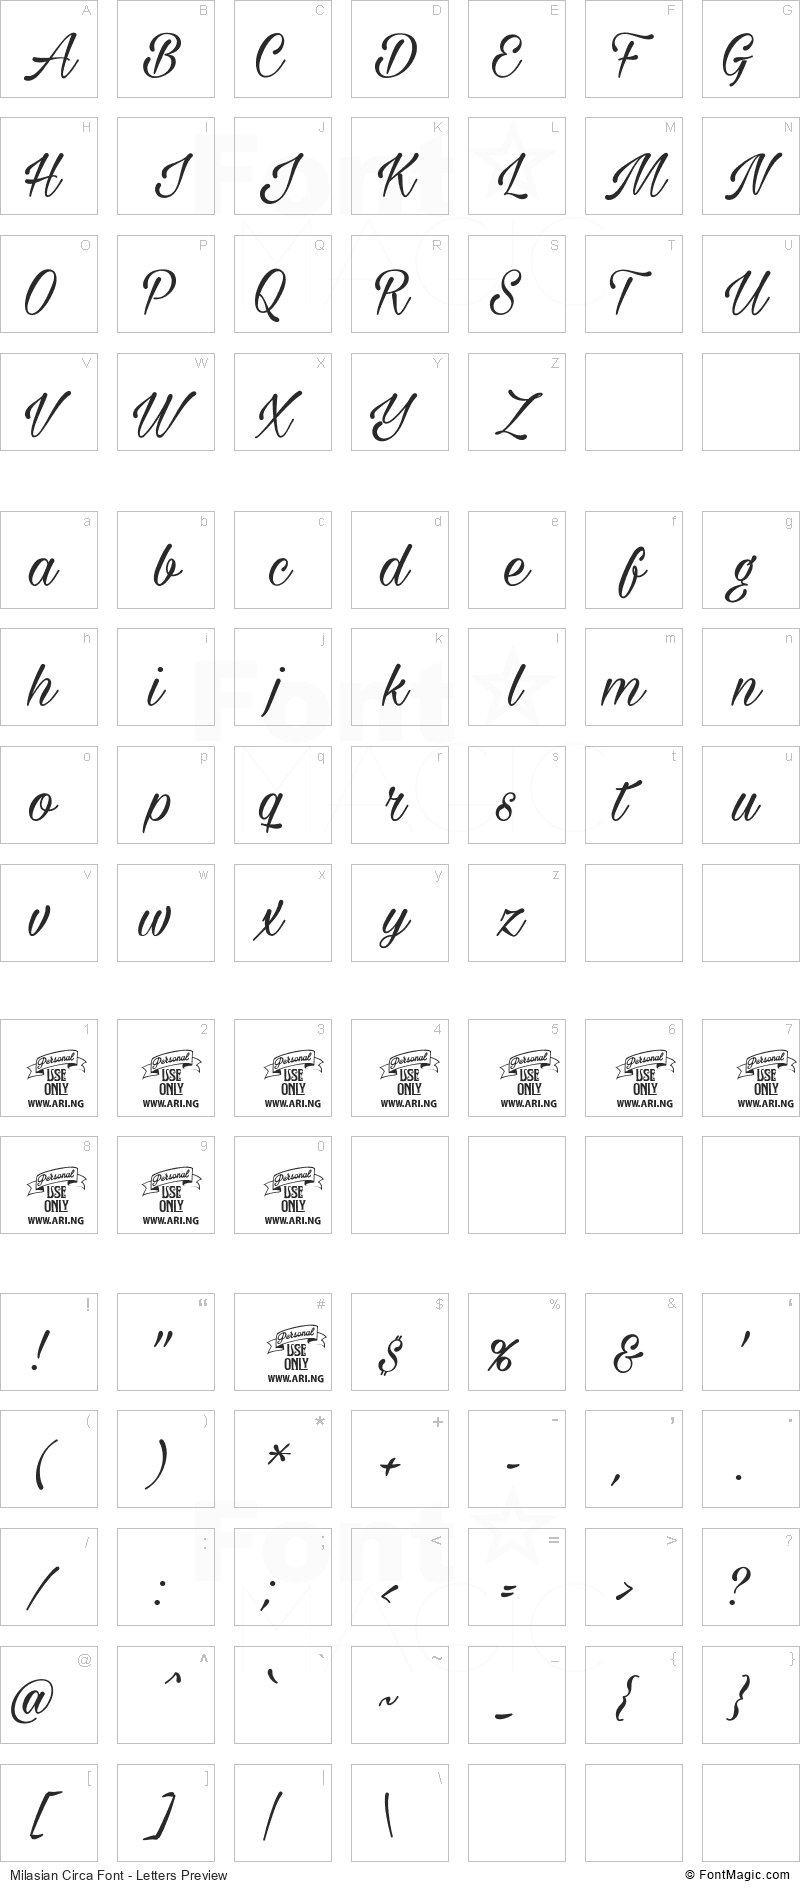 Milasian Circa Font - All Latters Preview Chart